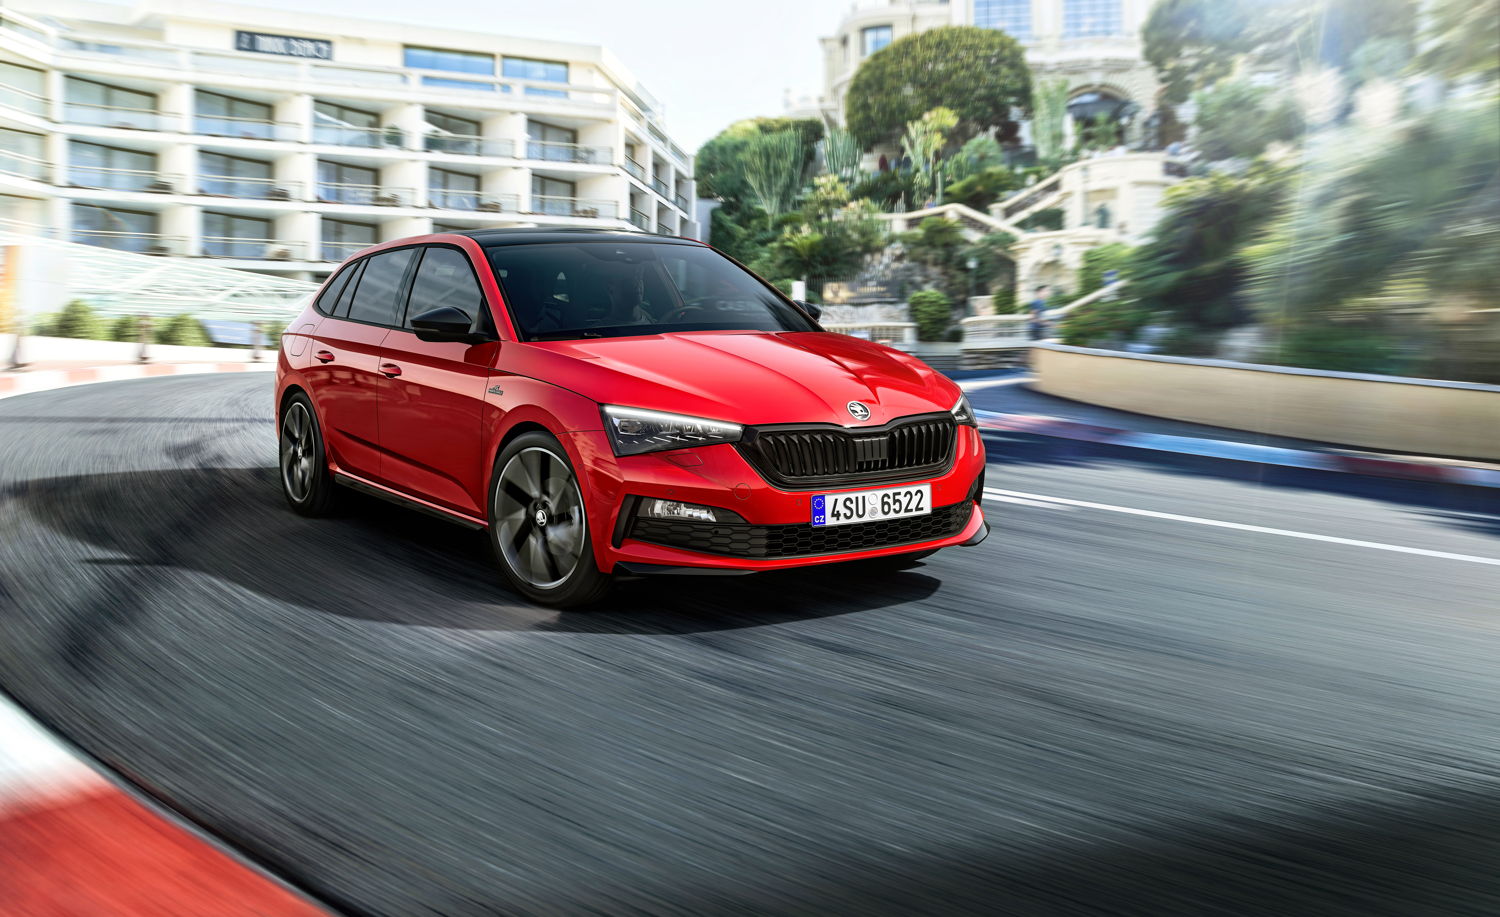 ŠKODA is expanding its new SCALA compact model series by introducing the popular MONTE CARLO trim level. It pays homage to the car maker's successful rally history and uses distinctive black elements and black ŠKODA lettering at the rear.